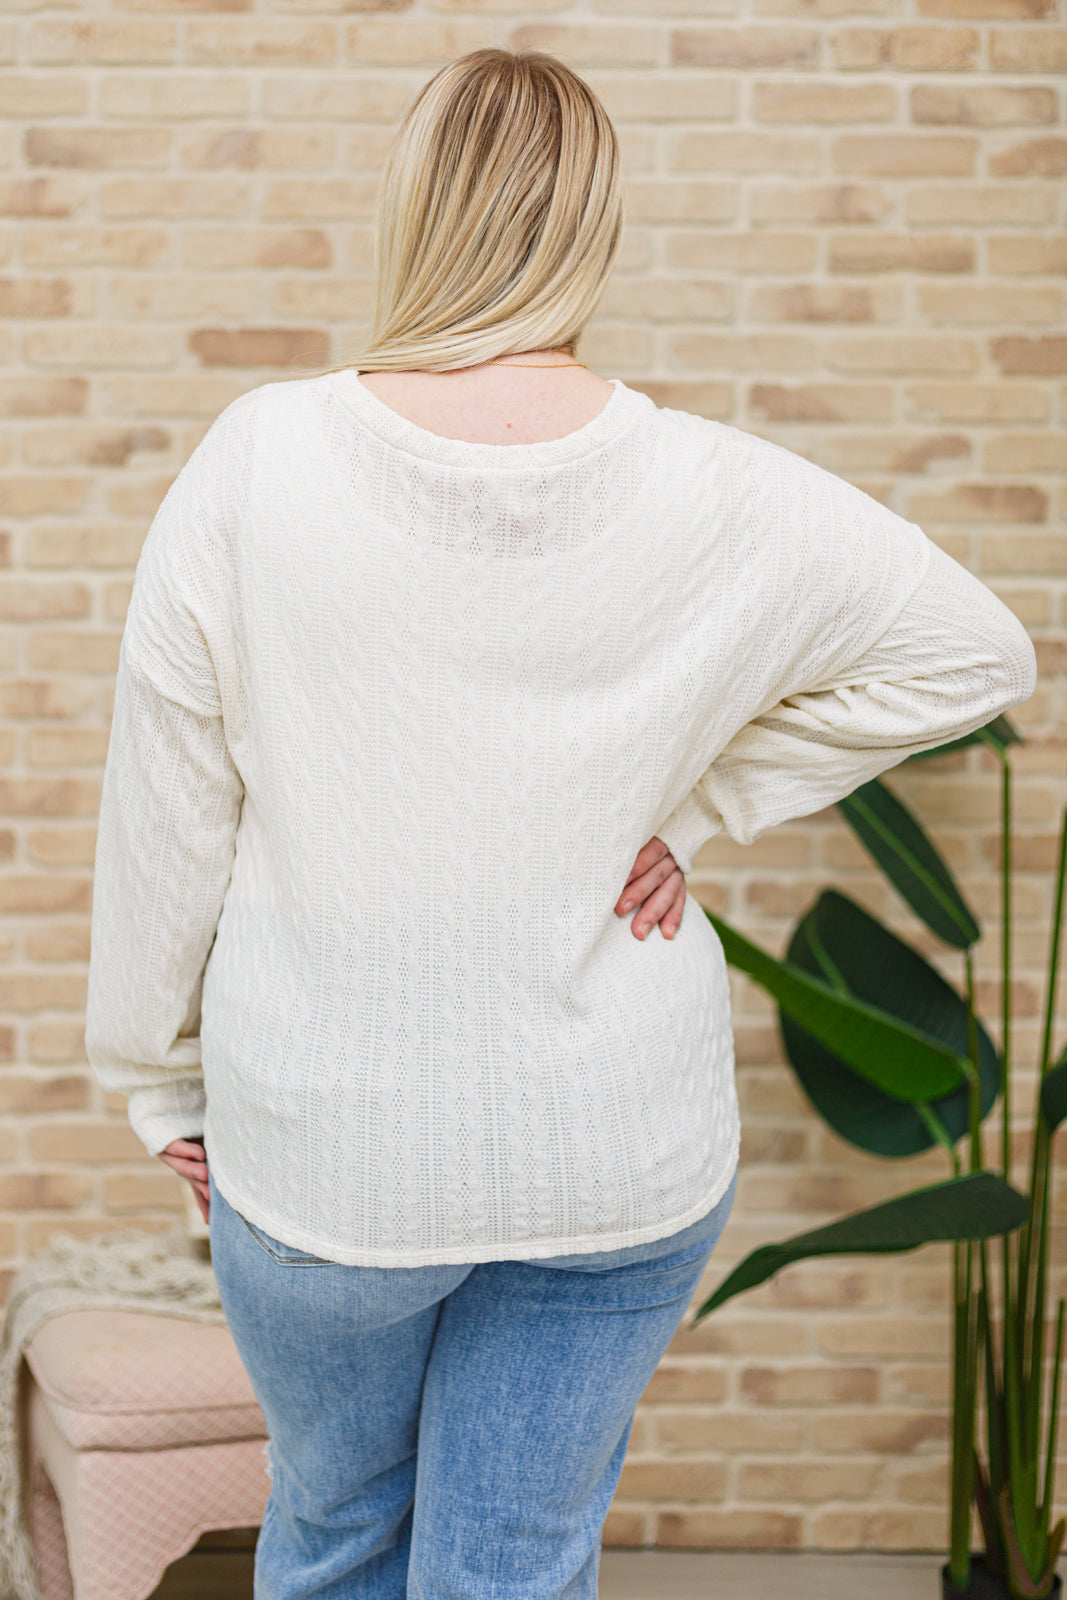 Keep Me Here Knit Sweater in Cream-Sweaters/Sweatshirts-Inspired by Justeen-Women's Clothing Boutique in Chicago, Illinois